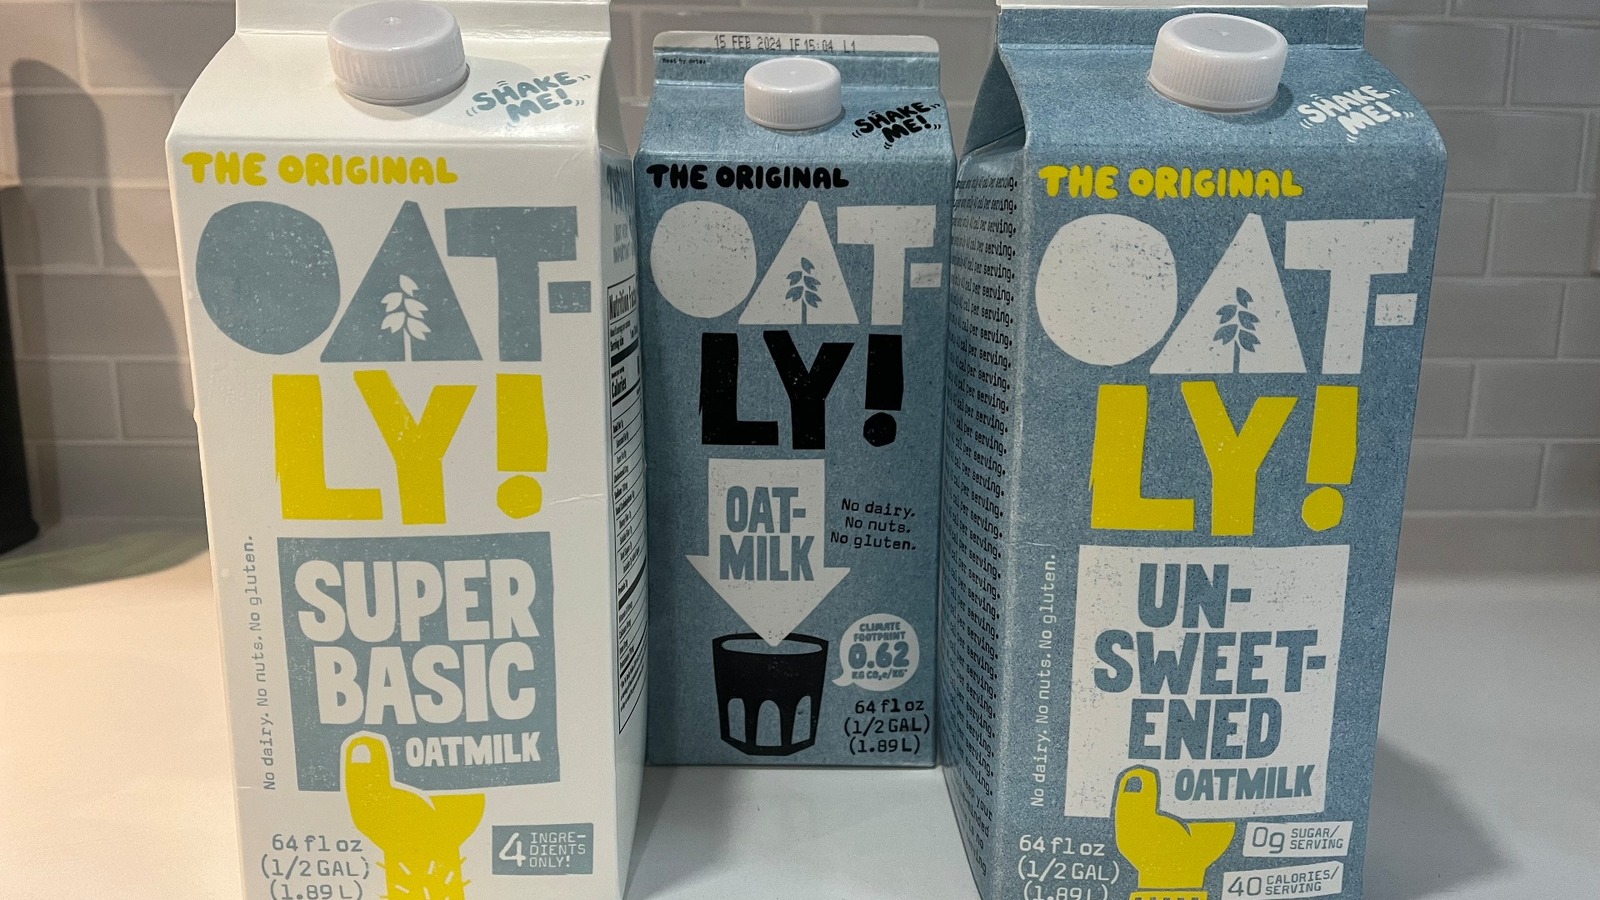 Oatly launches new oat drink lines with improved recipes, News